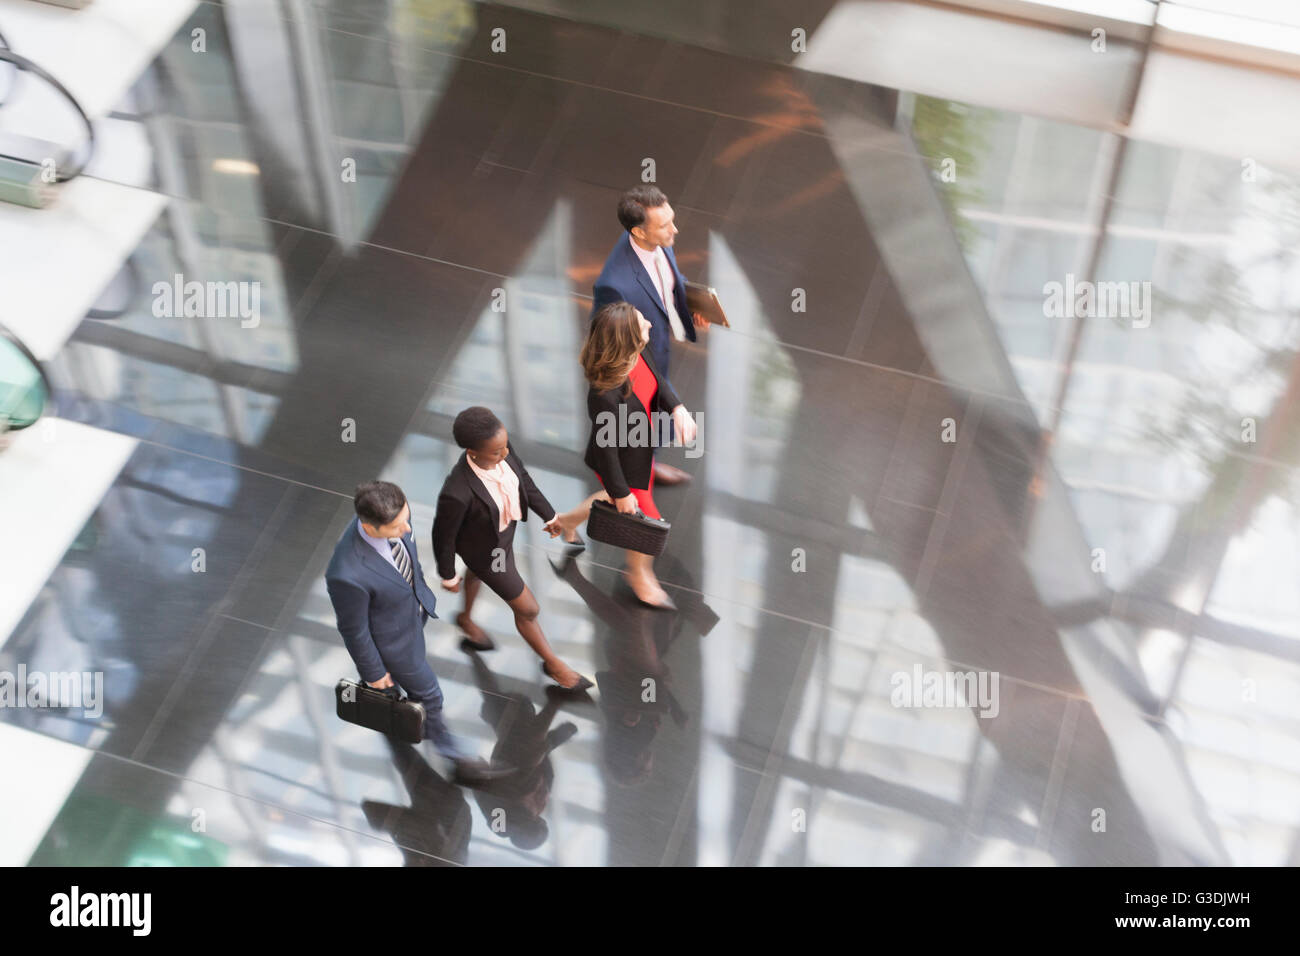 Corporate business people walking in modern office lobby Stock Photo